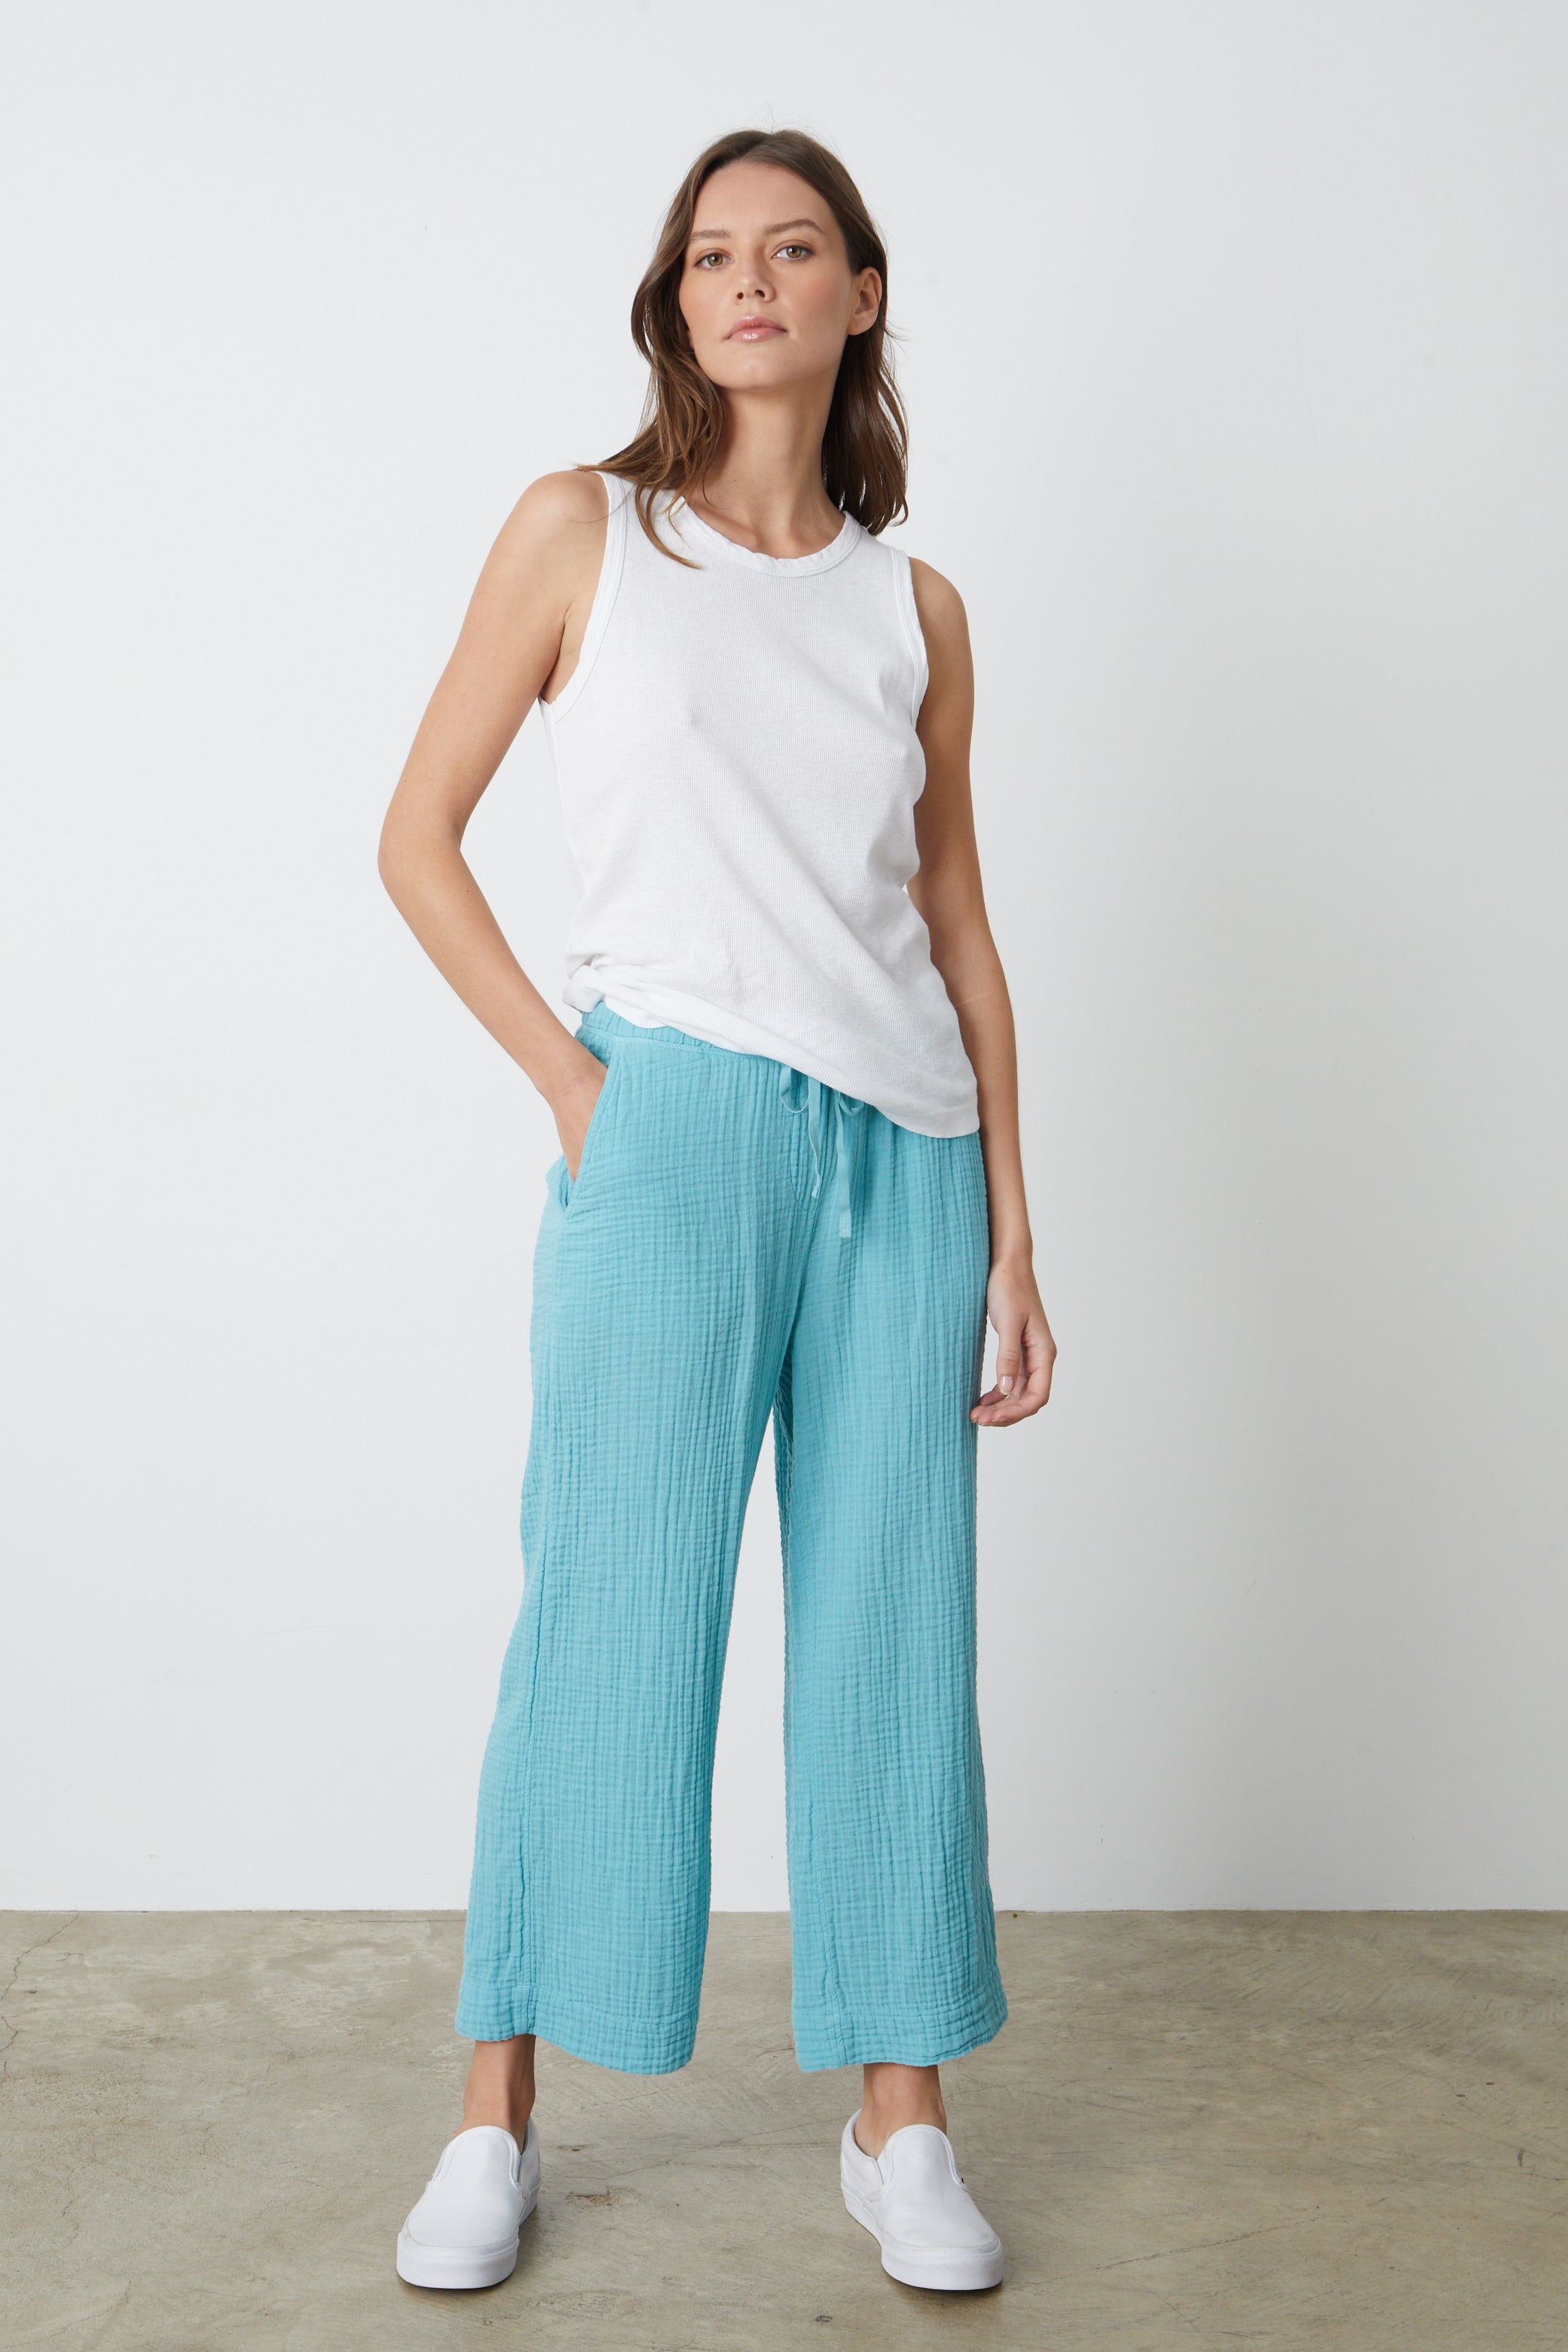   A model wearing a white tank top and Velvet by Graham & Spencer's FRANNY COTTON GAUZE PANT. 